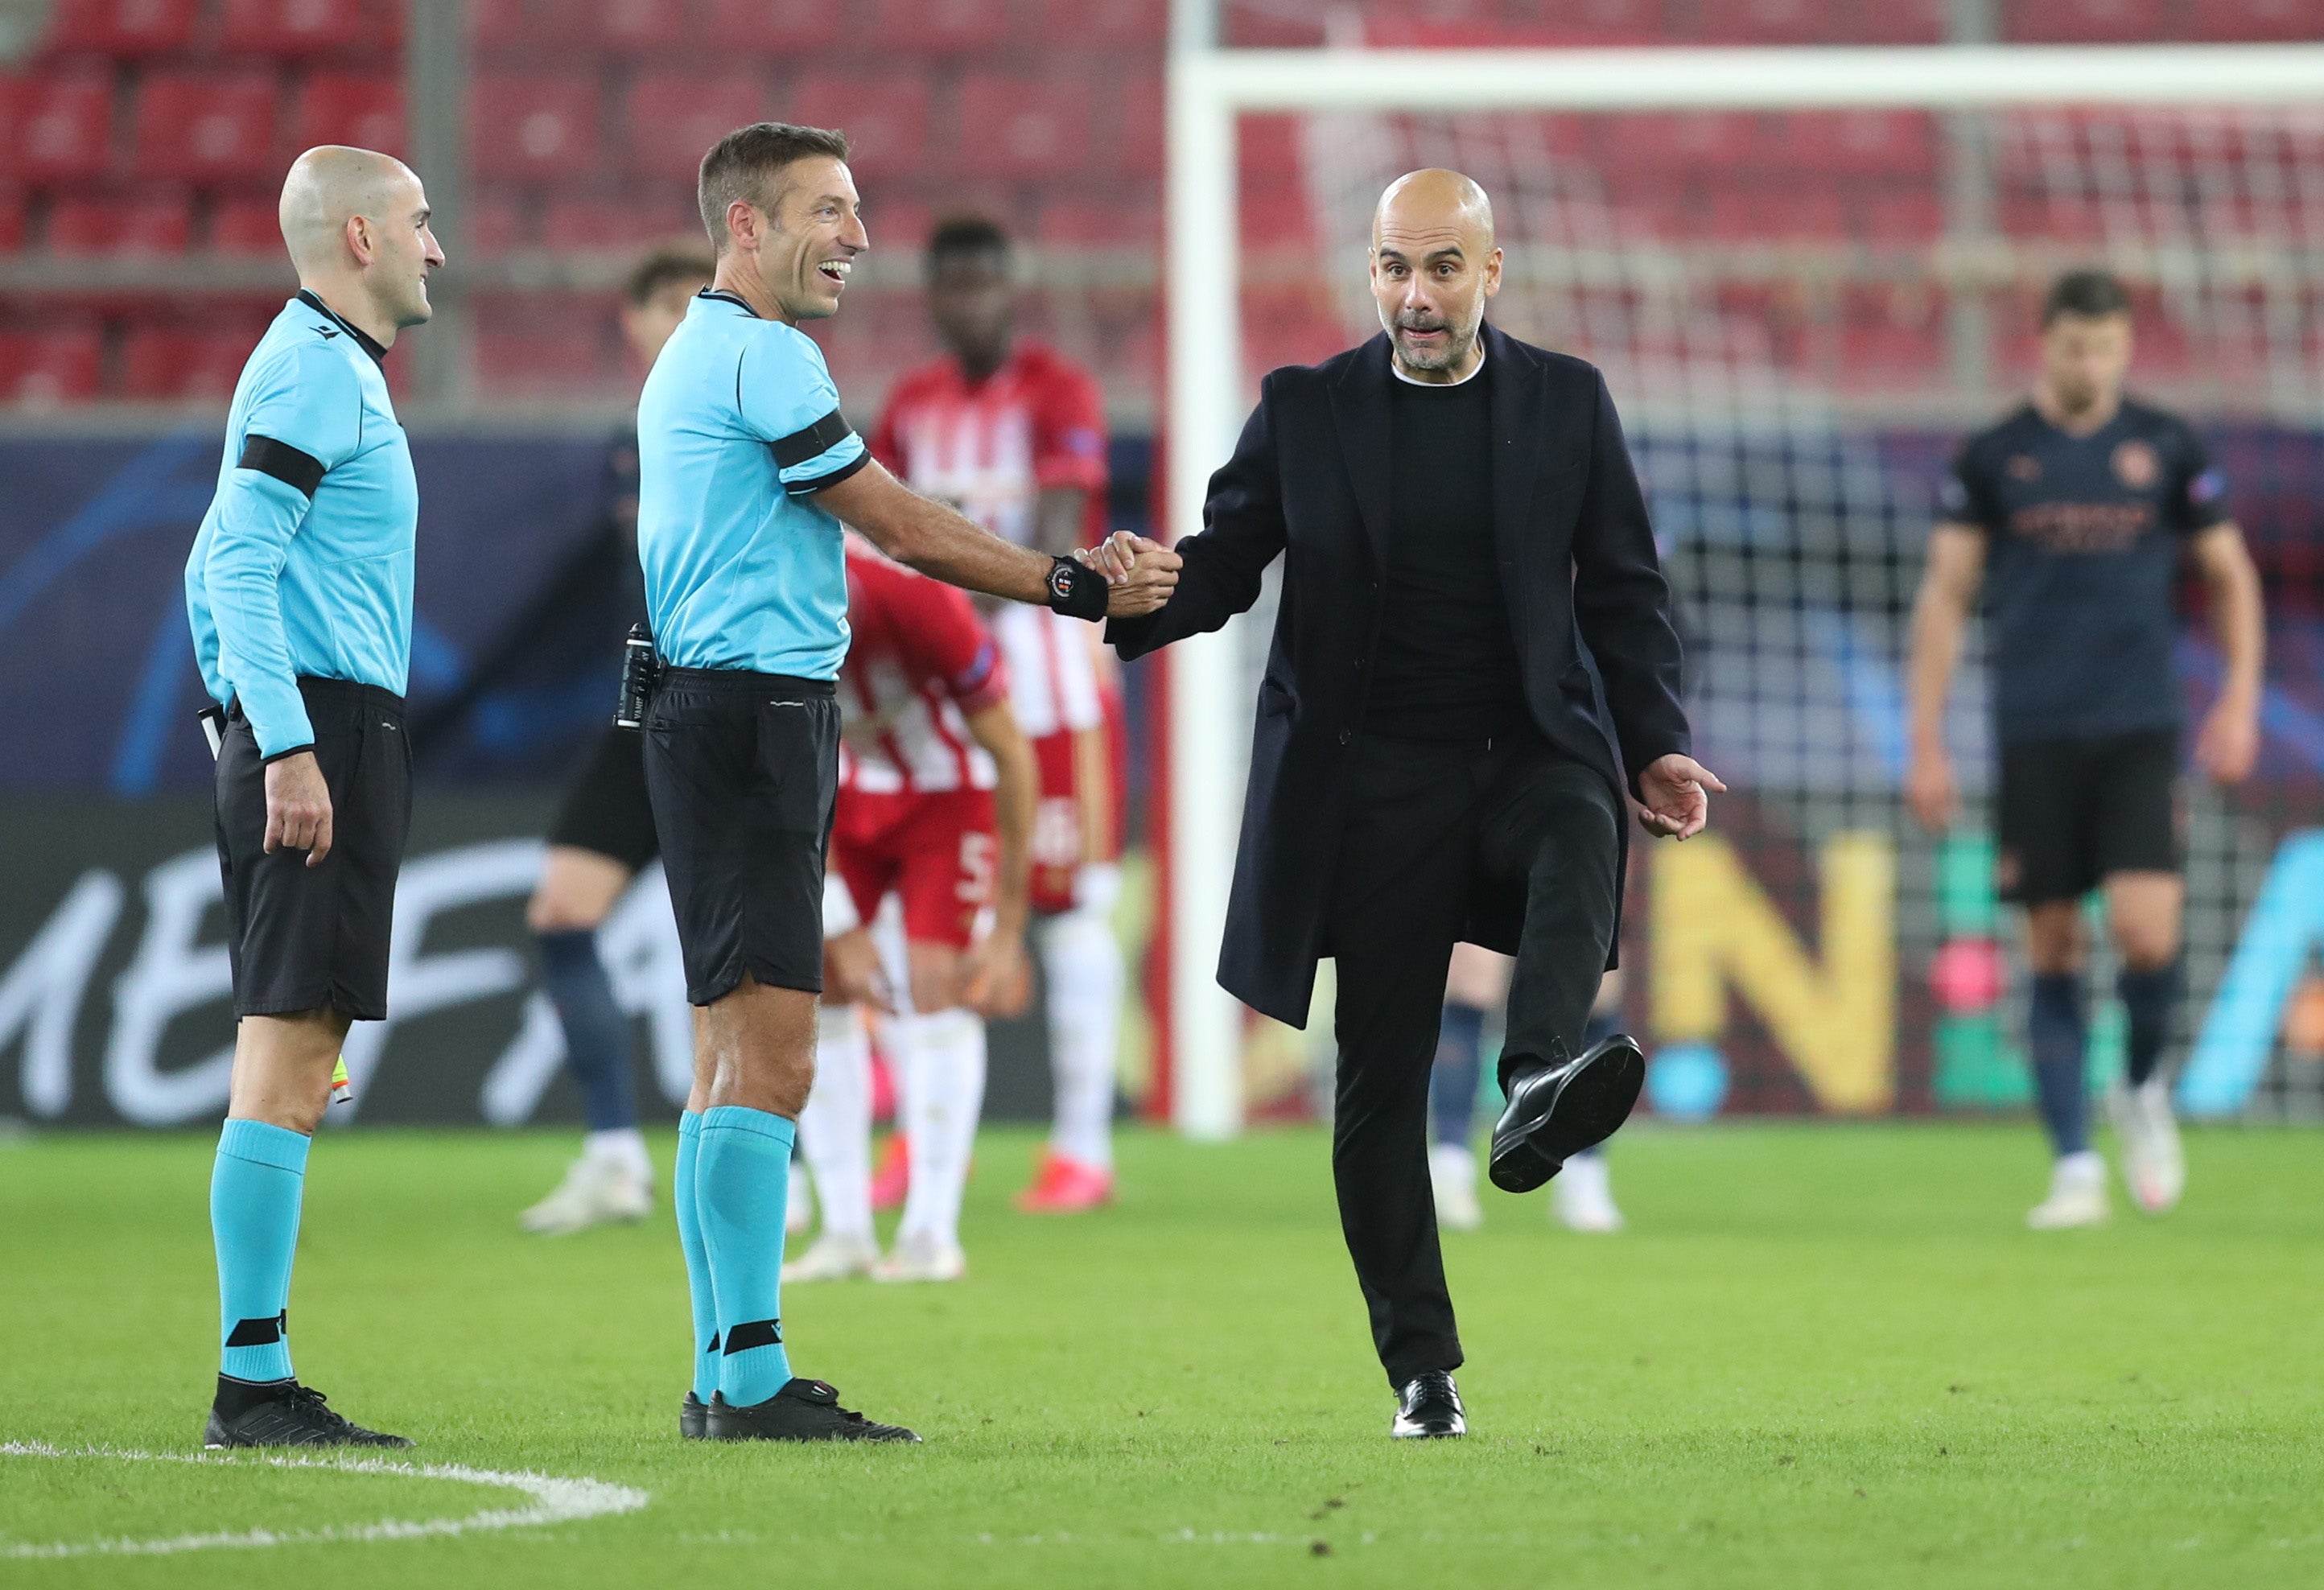 Pep Guardiola speaks with the referee